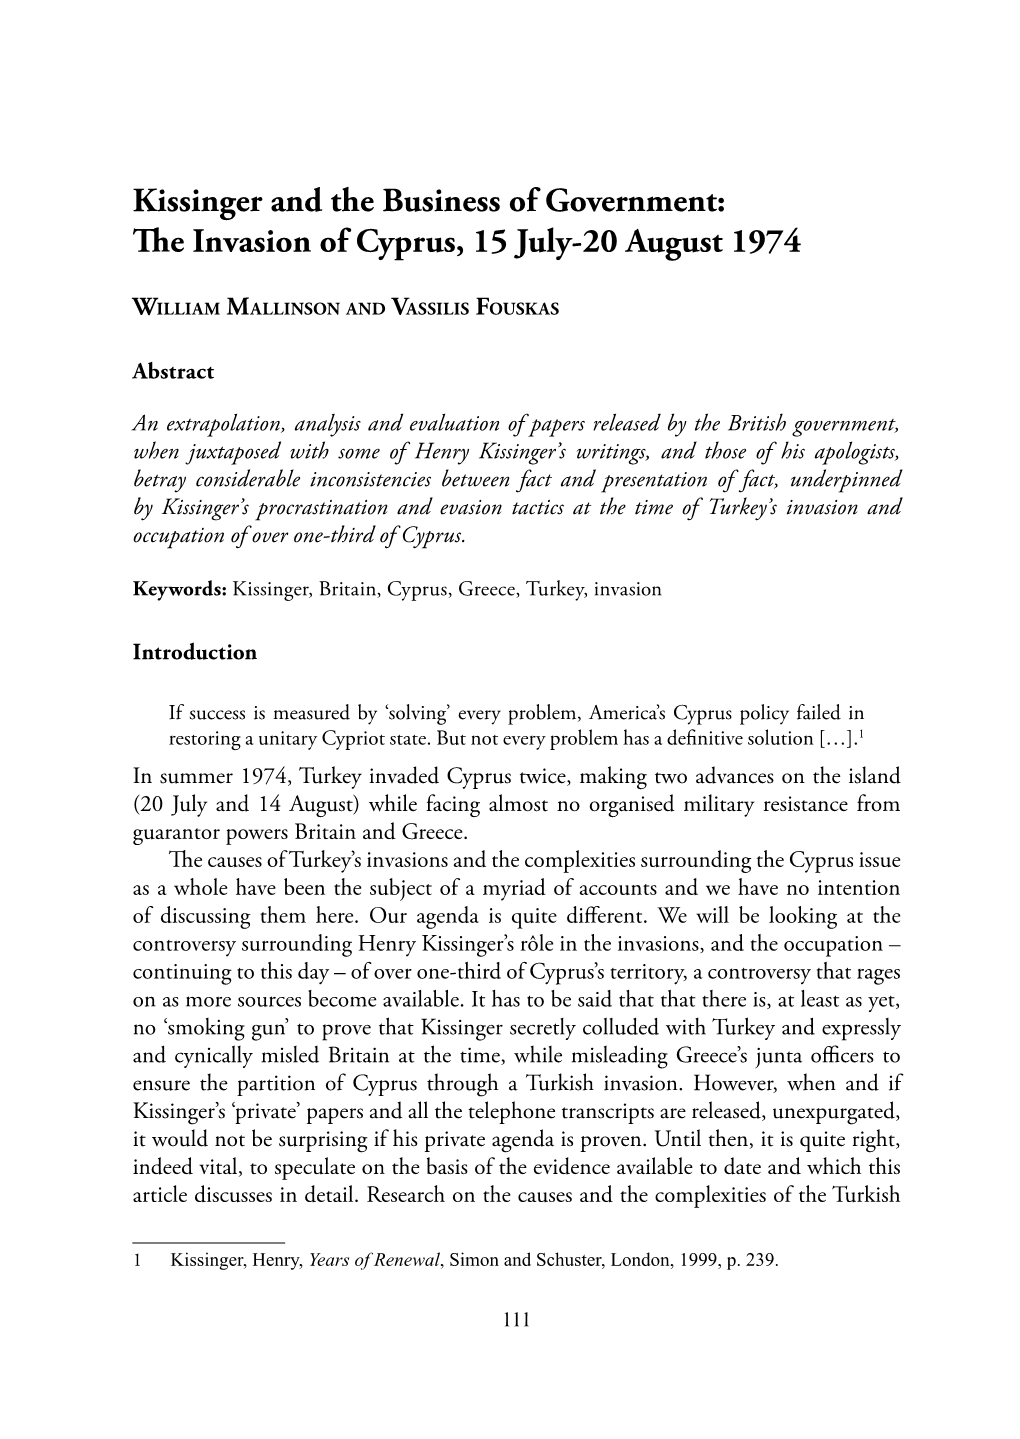 The Invasion of Cyprus, 15 July-20 August 1974